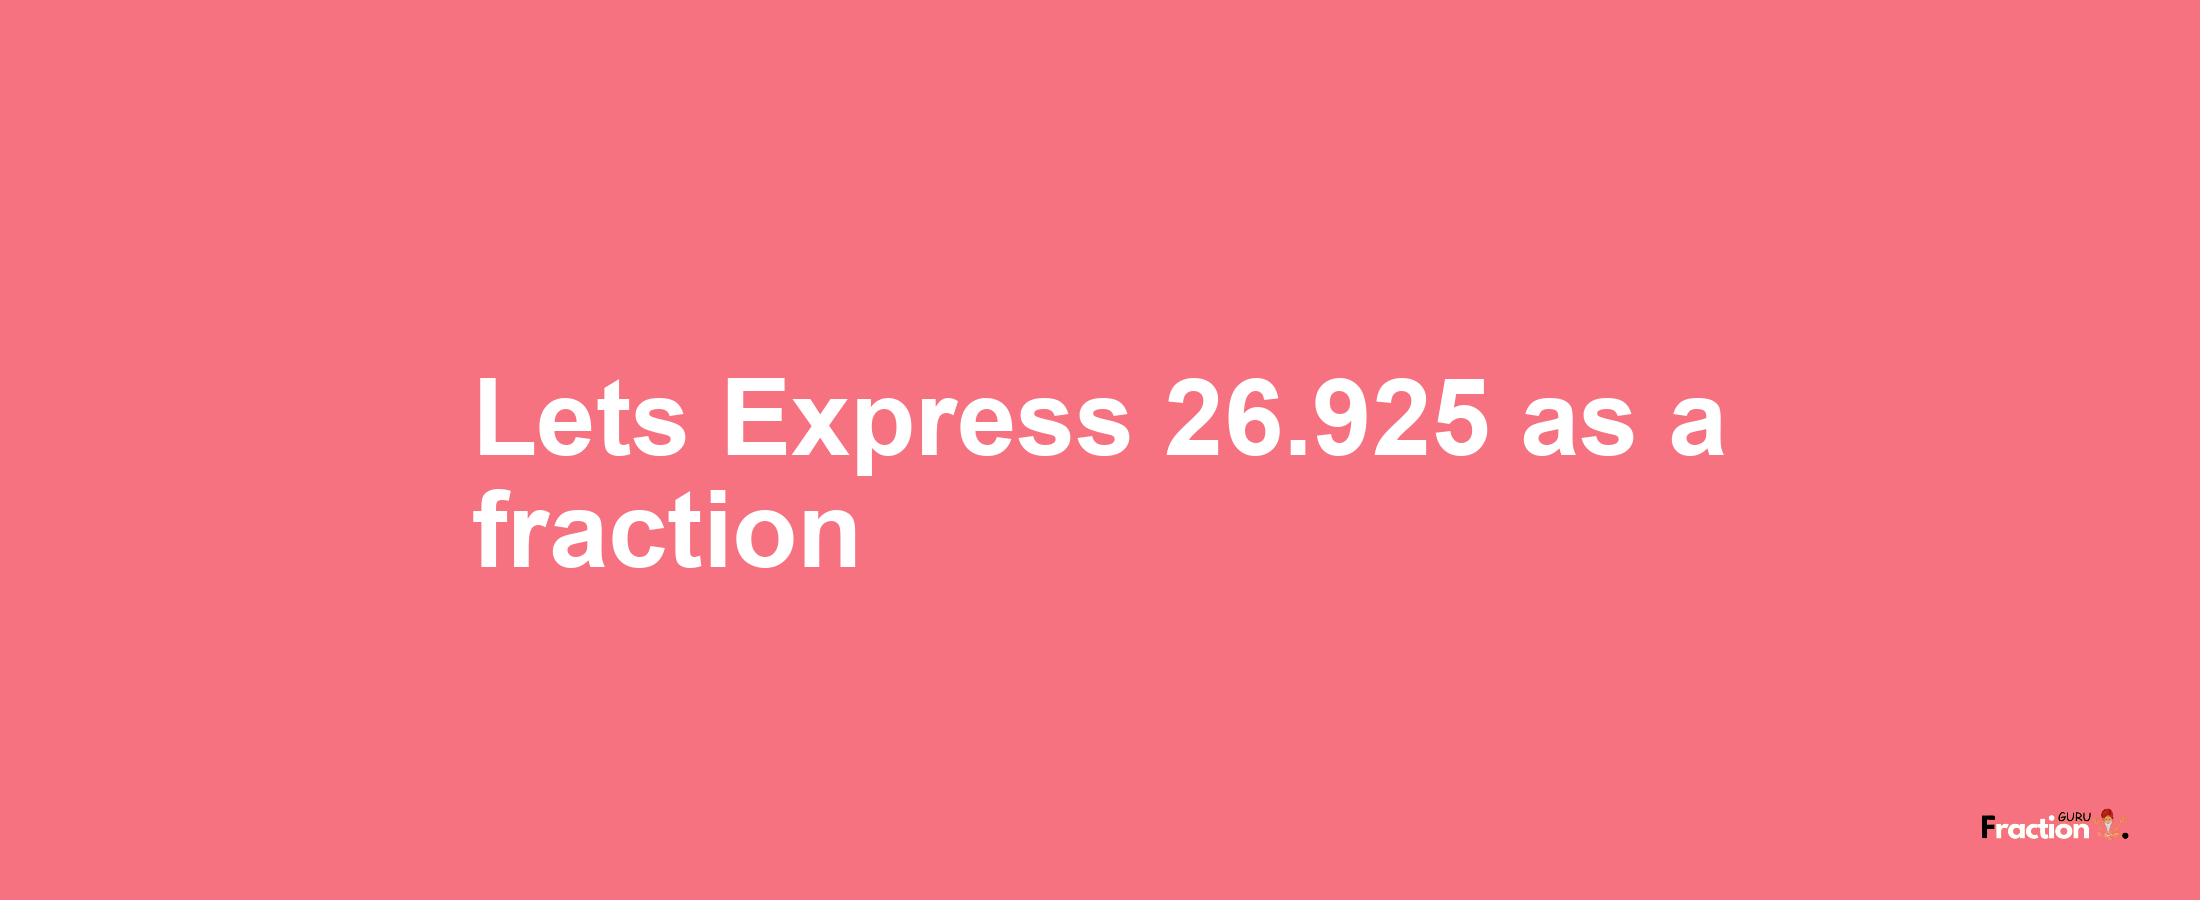 Lets Express 26.925 as afraction